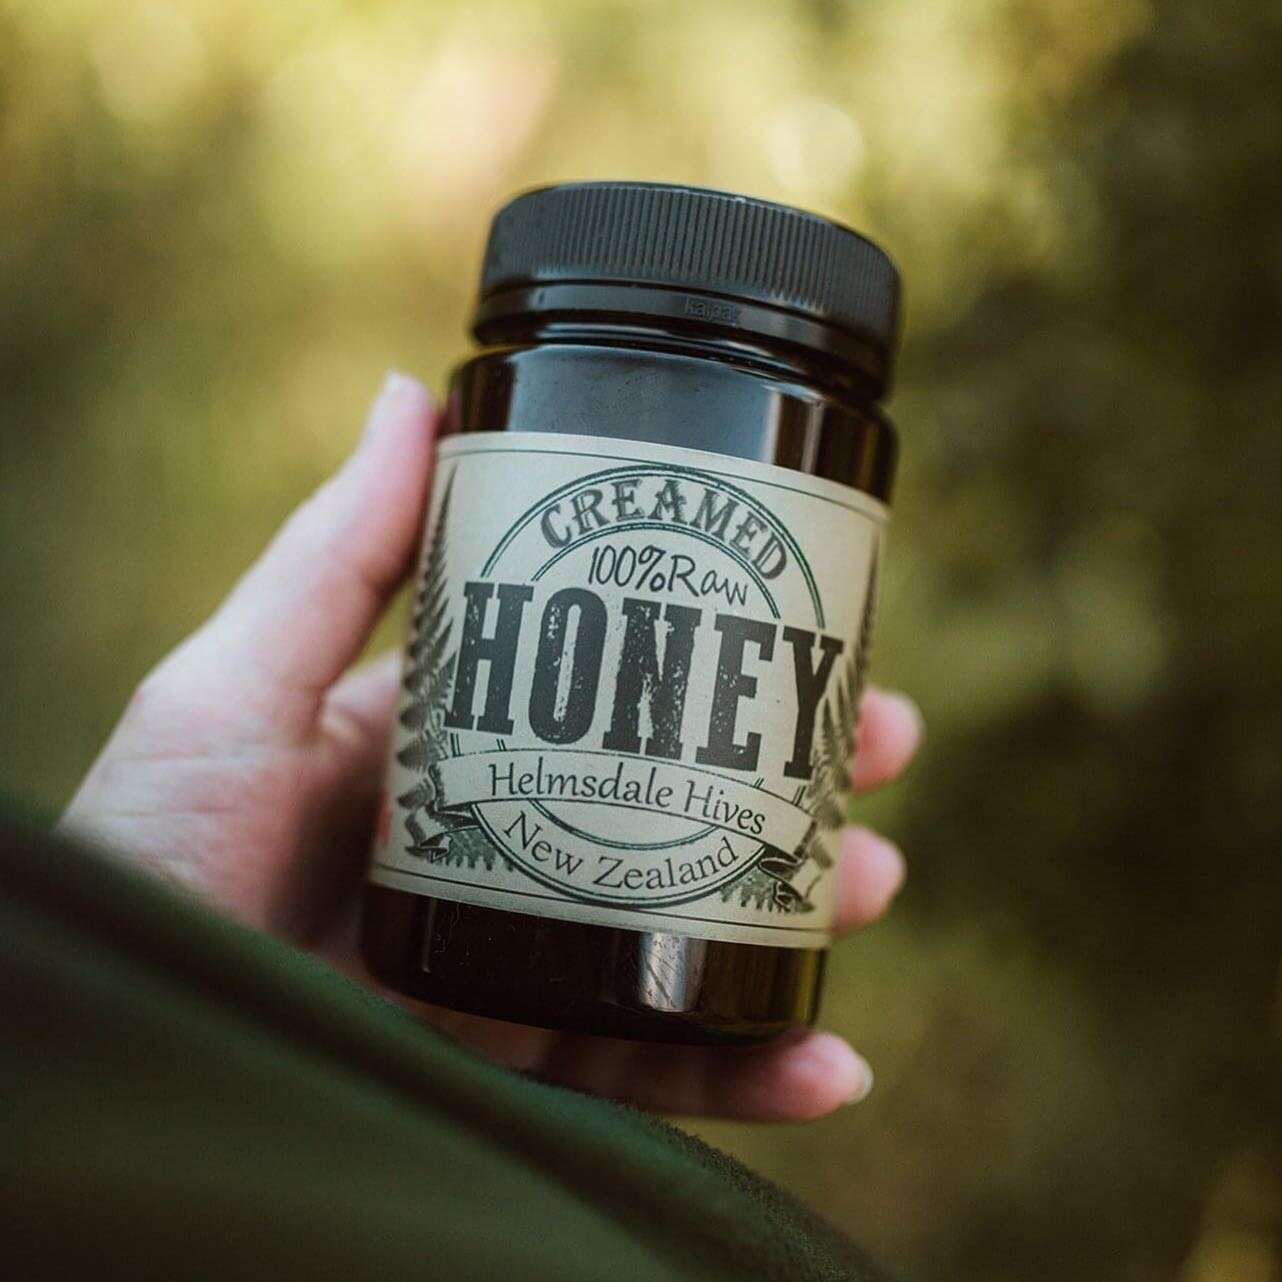 It's the kind of day, 🌧 you just want to stay home warm and dry by the fire 🔥 #winter #honey #warmth #lemonandhoney #honey #bushhoney #nzhoney #kiwihoney #whangarei